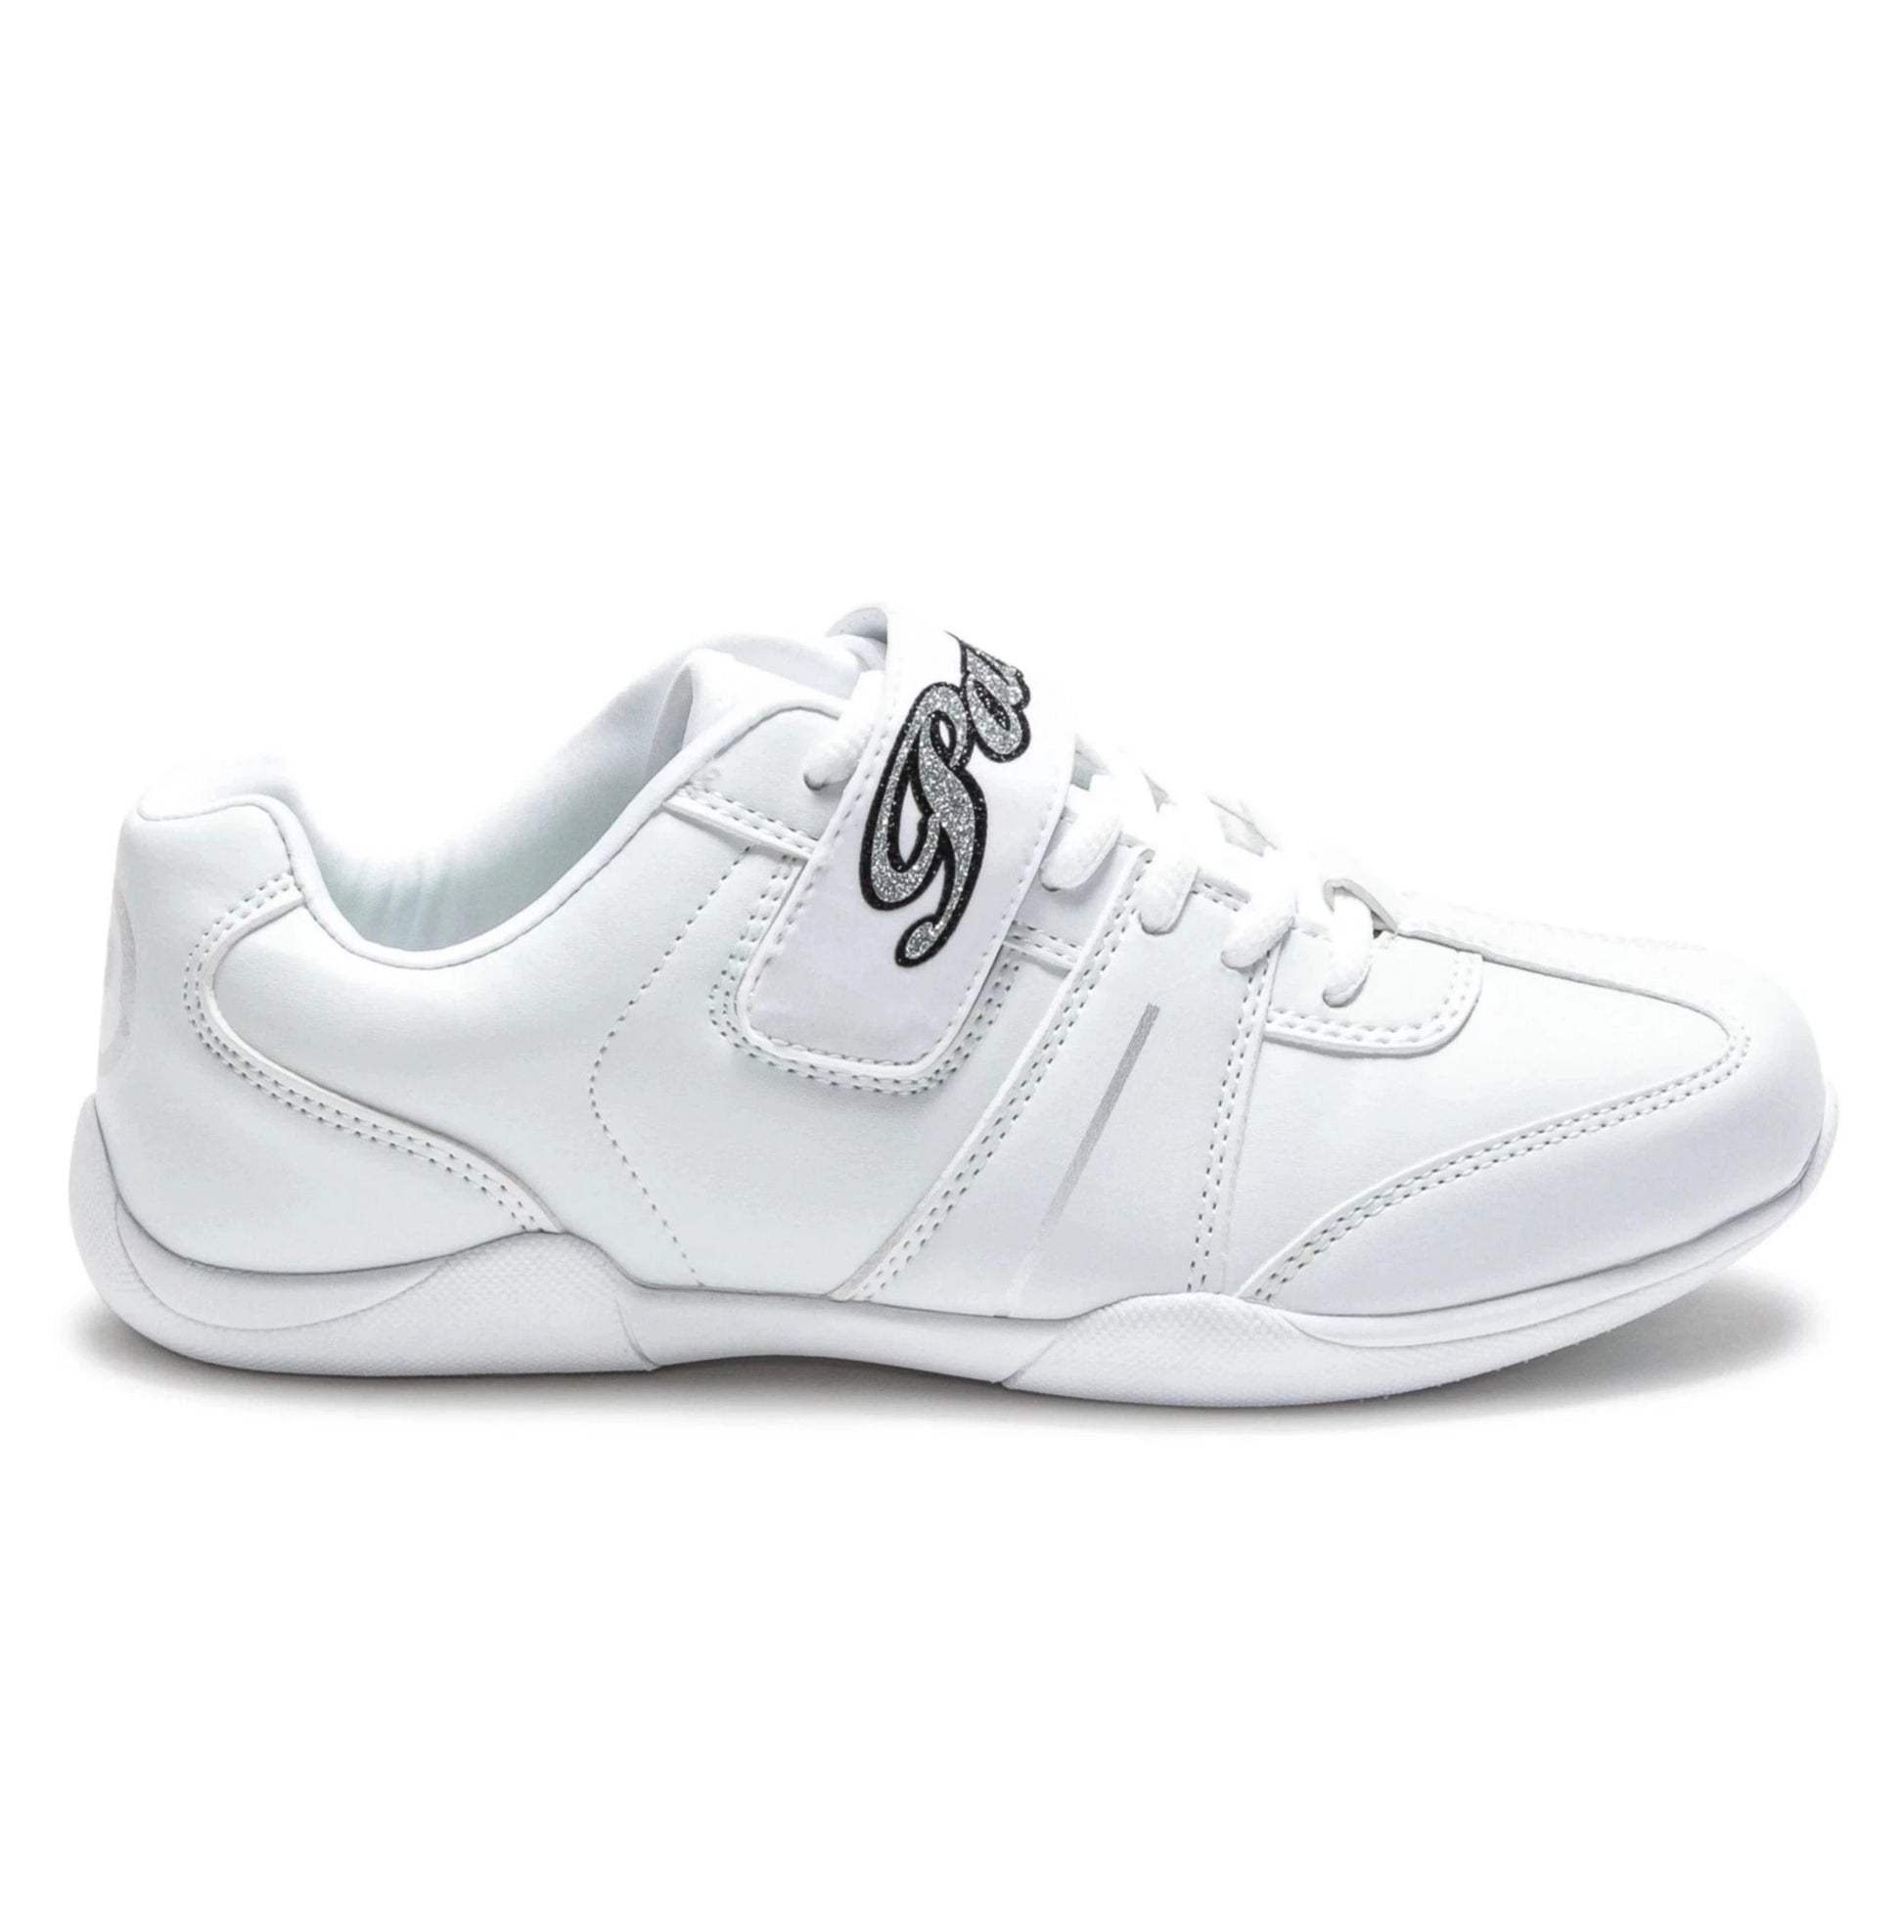 Pastry Custom Spirit Adult Women's Cheer Sneaker in White lateral view